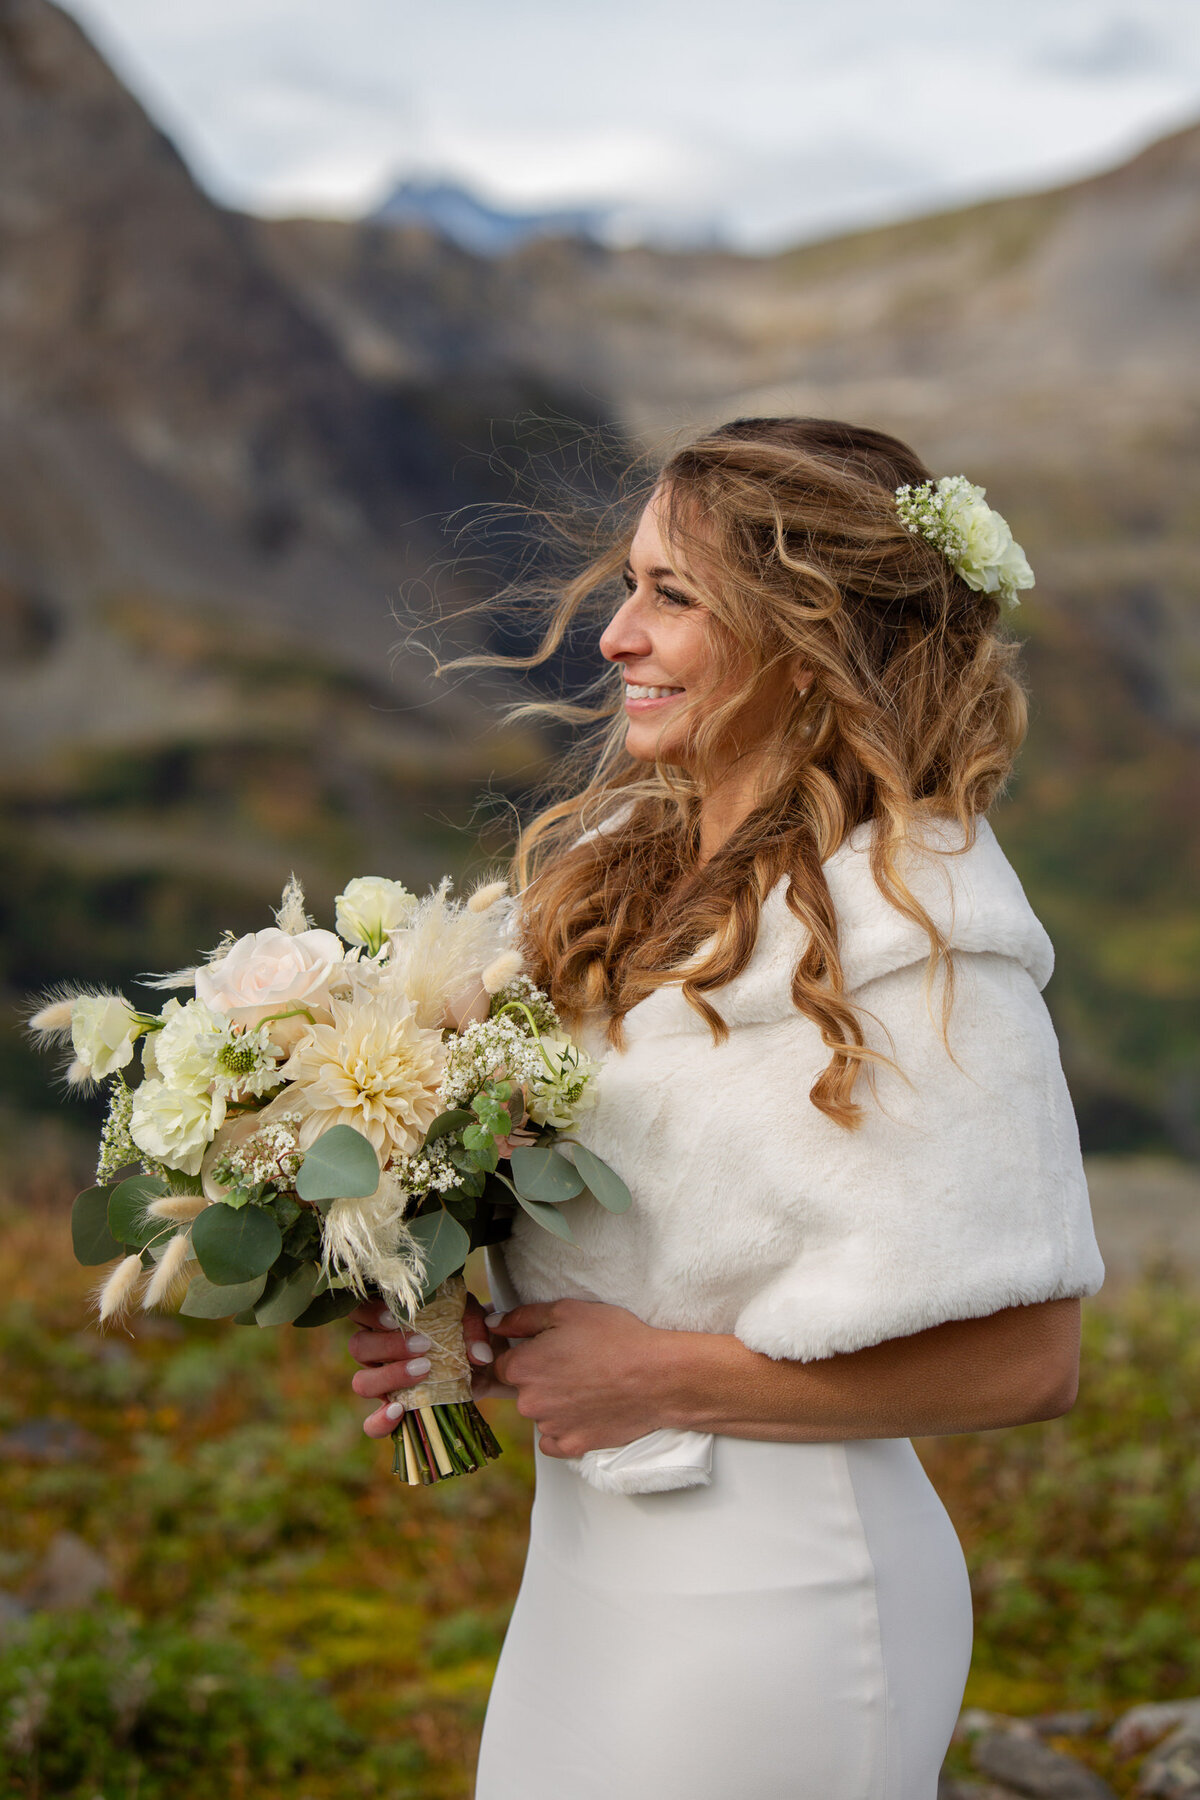 A bride stands smiling with her wedding bouquet on her elopement day.